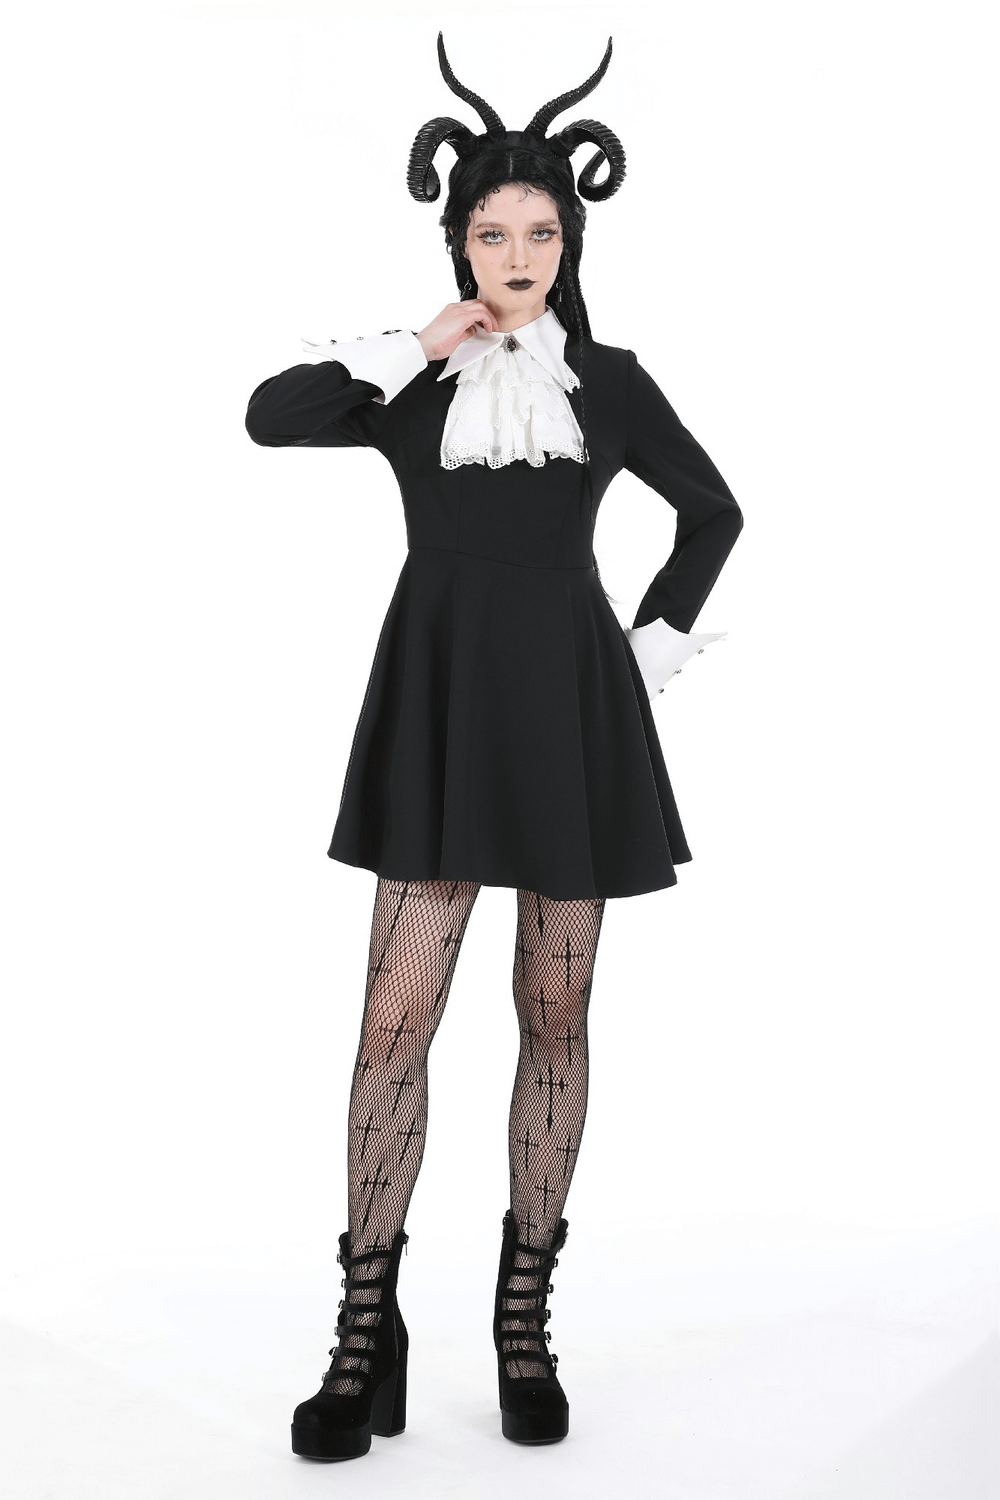 Black Victorian Dress with White Collar and Cuffs